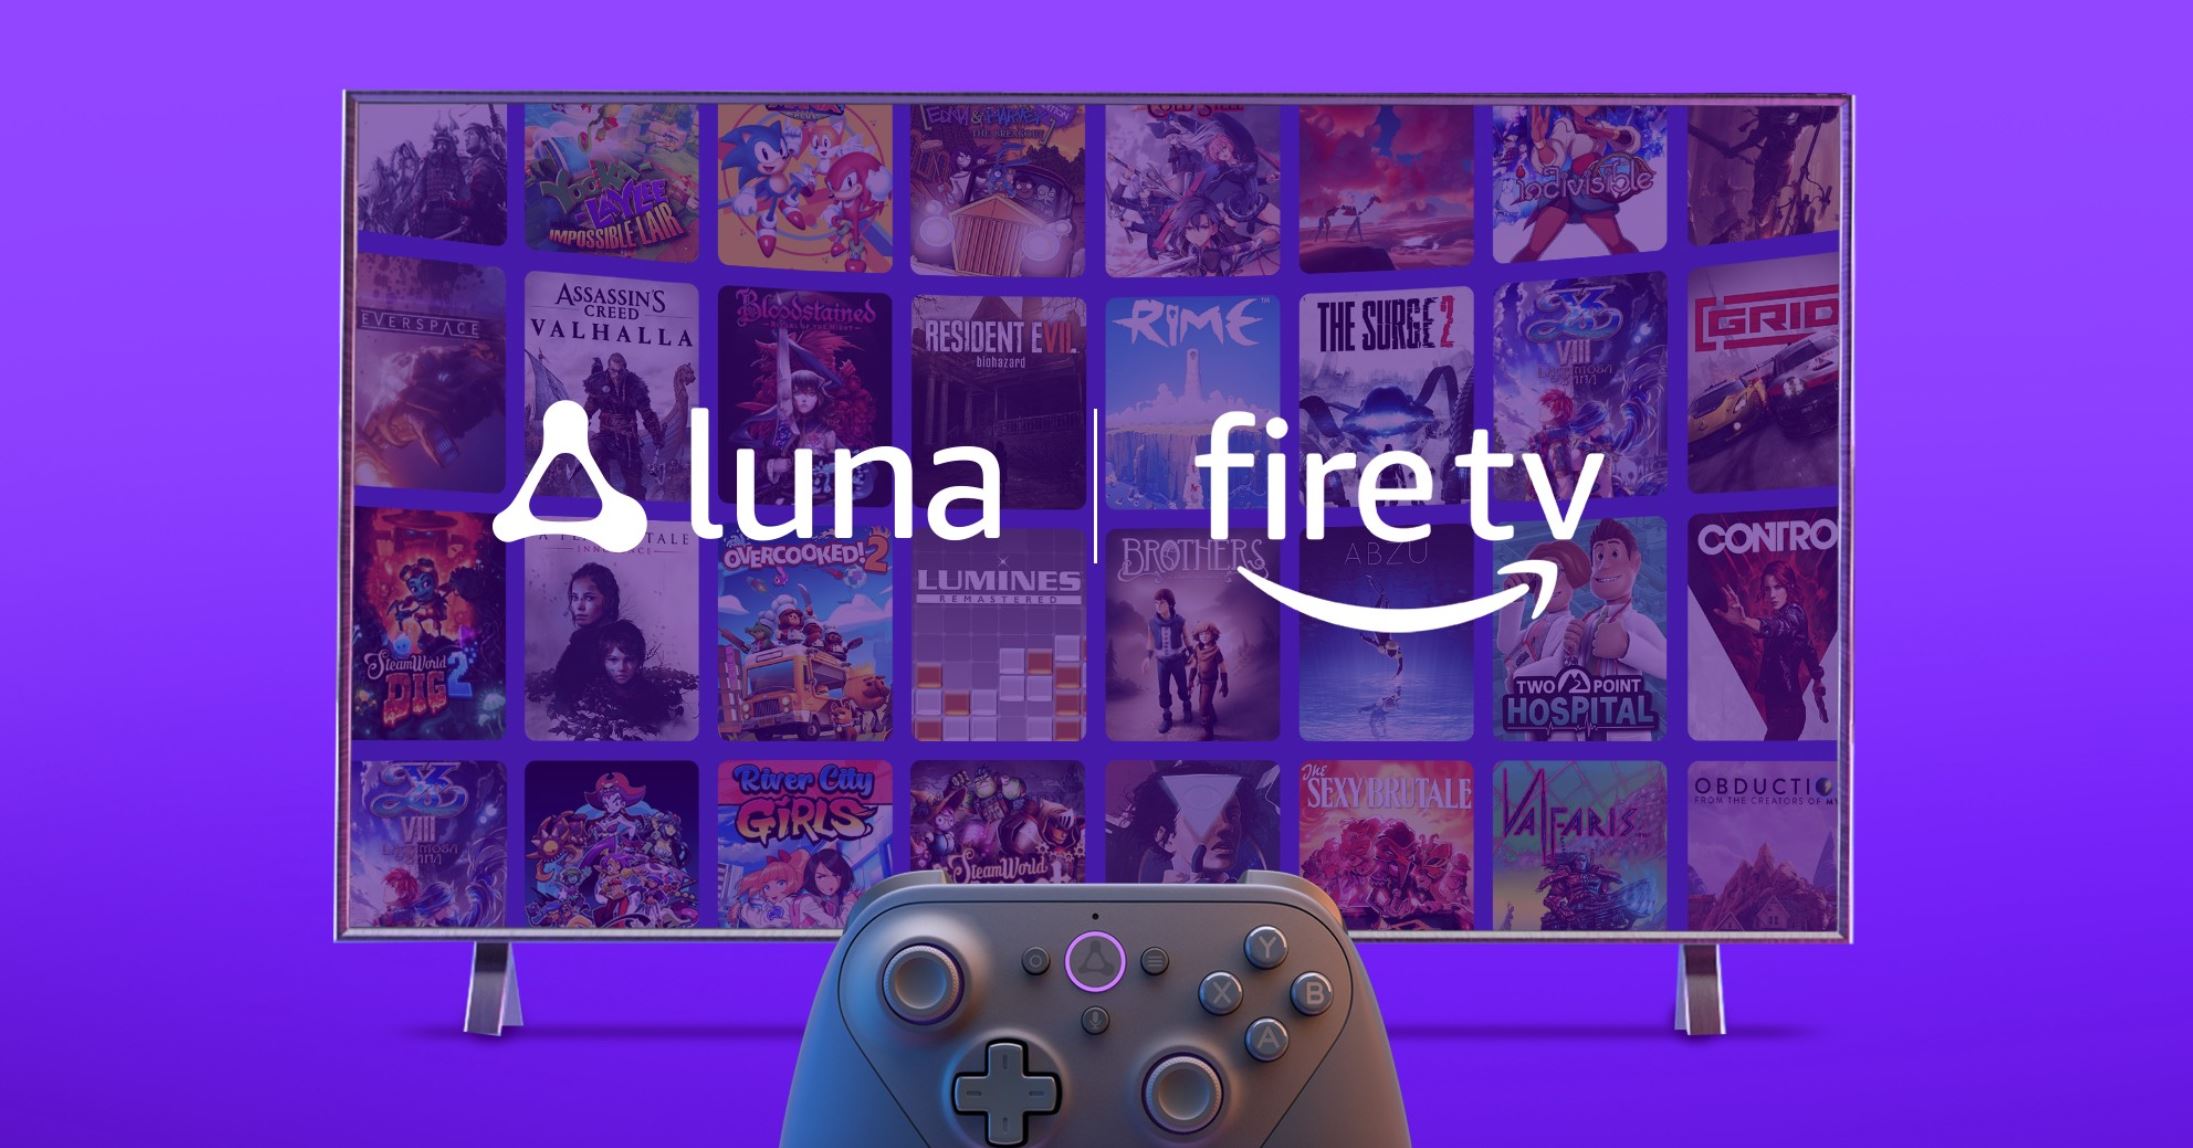 Amazon's cloud gaming service, Amazon Luna, expands access to Fire TV users  | GBAtemp.net - The Independent Video Game Community